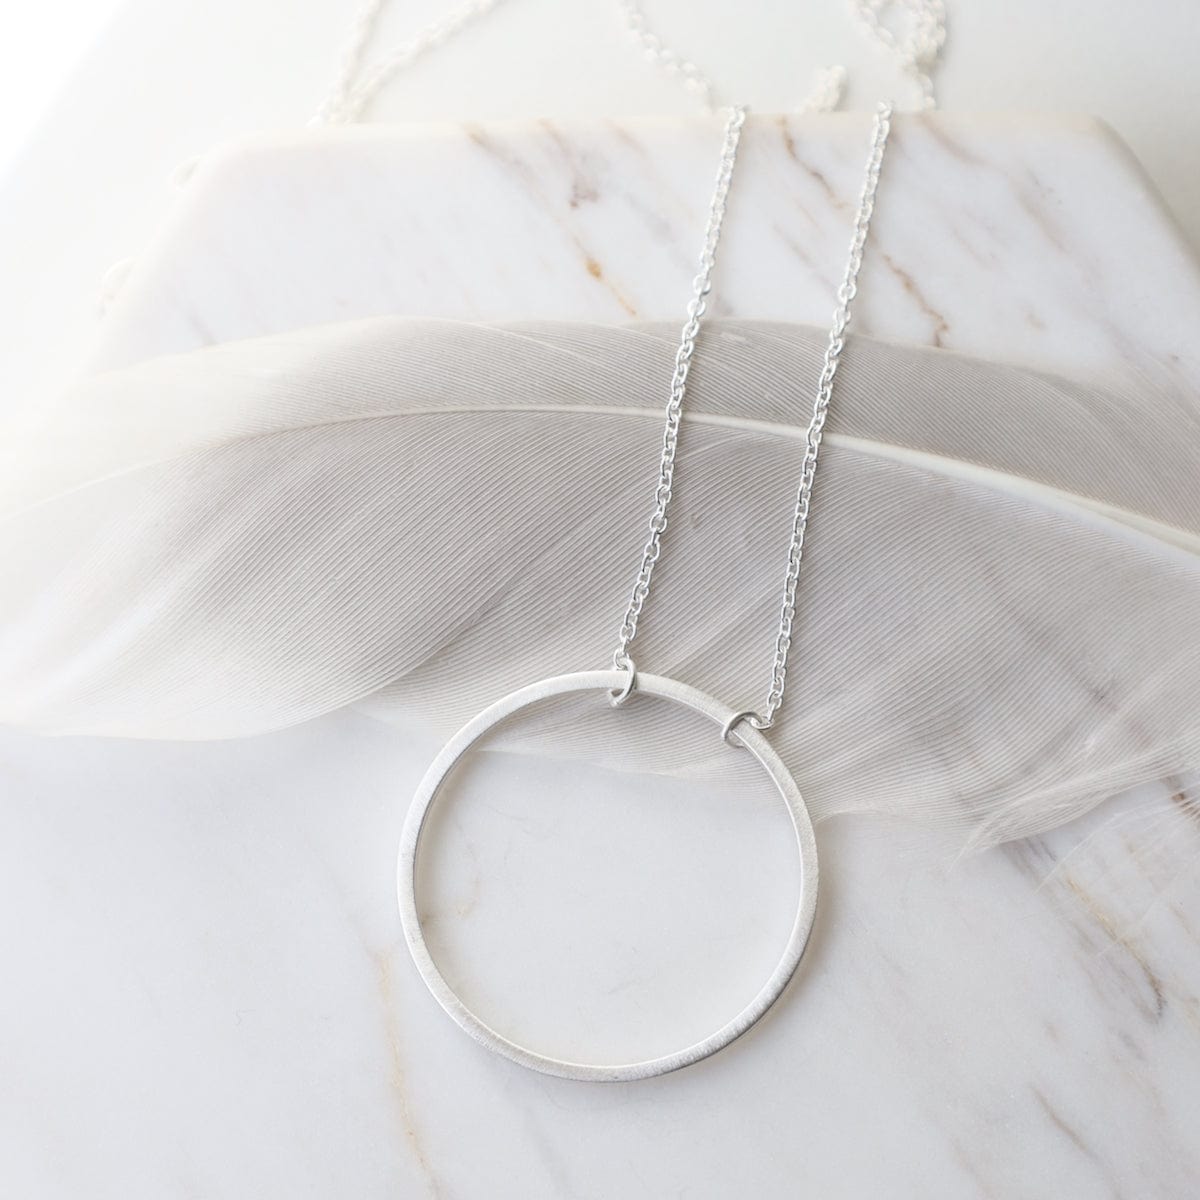 NKL Big Wire Circle Necklace in Brushed Sterling Silver